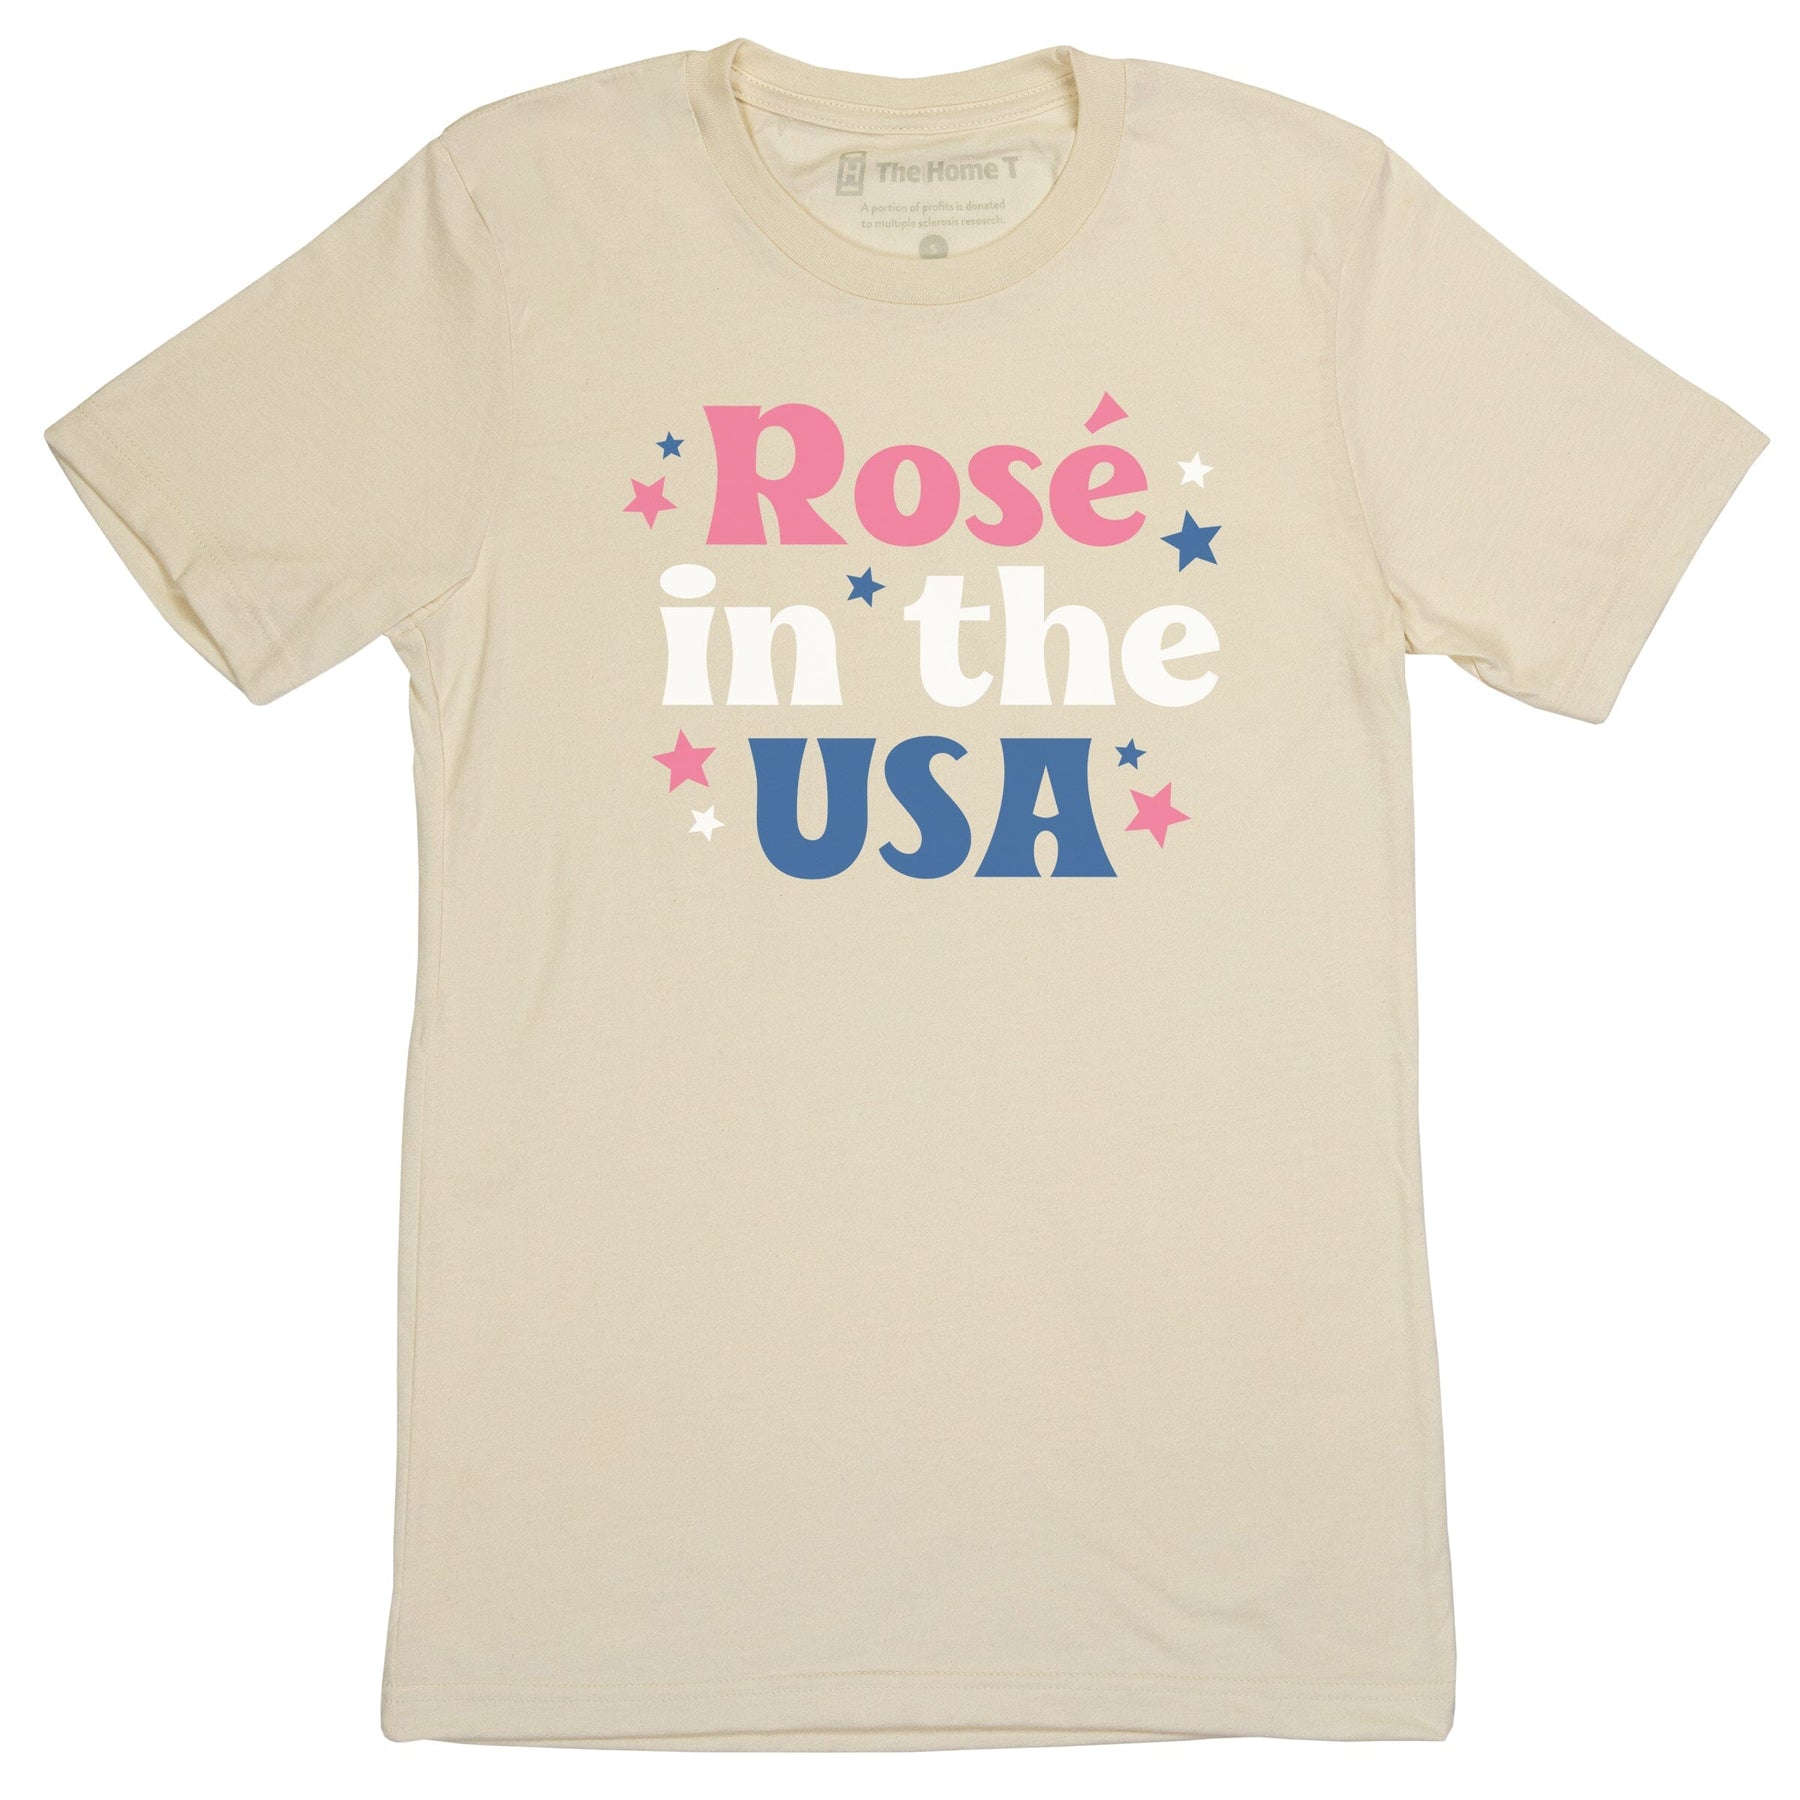 Rose in the USA